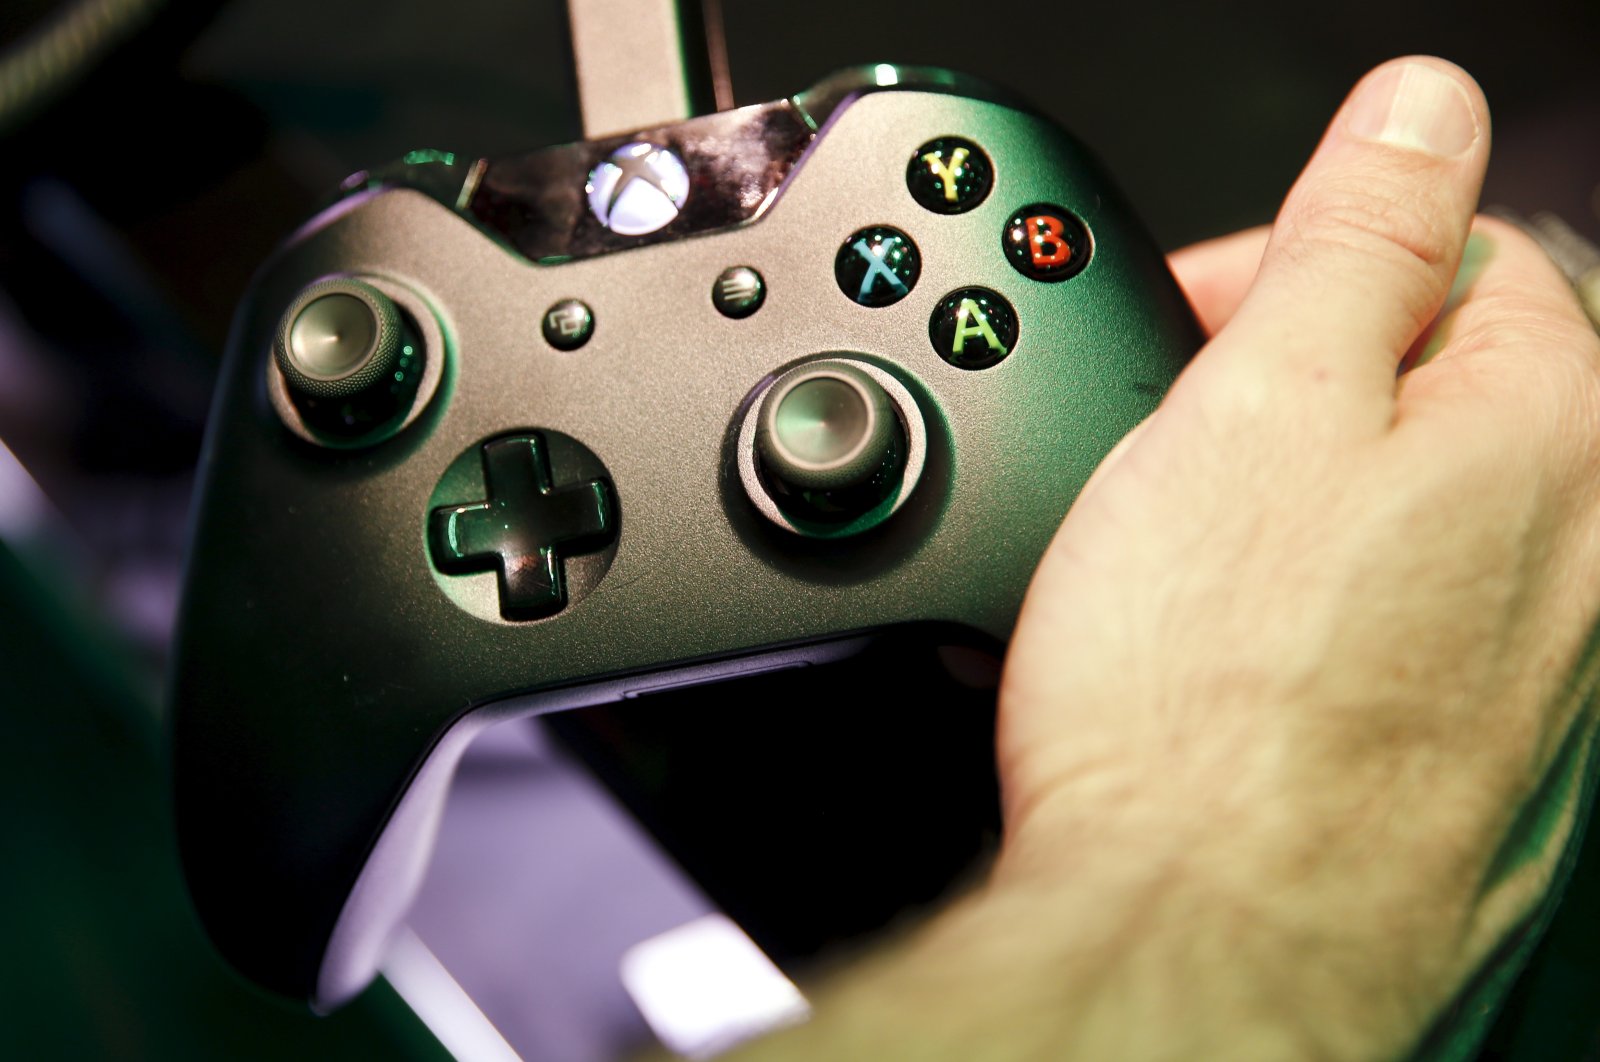 An attendee holds a Microsoft Xbox controller while playing a video game at the Electronic Entertainment Expo, or E3, in Los Angeles, California, United States, June 17, 2015. (Reuters Photo)